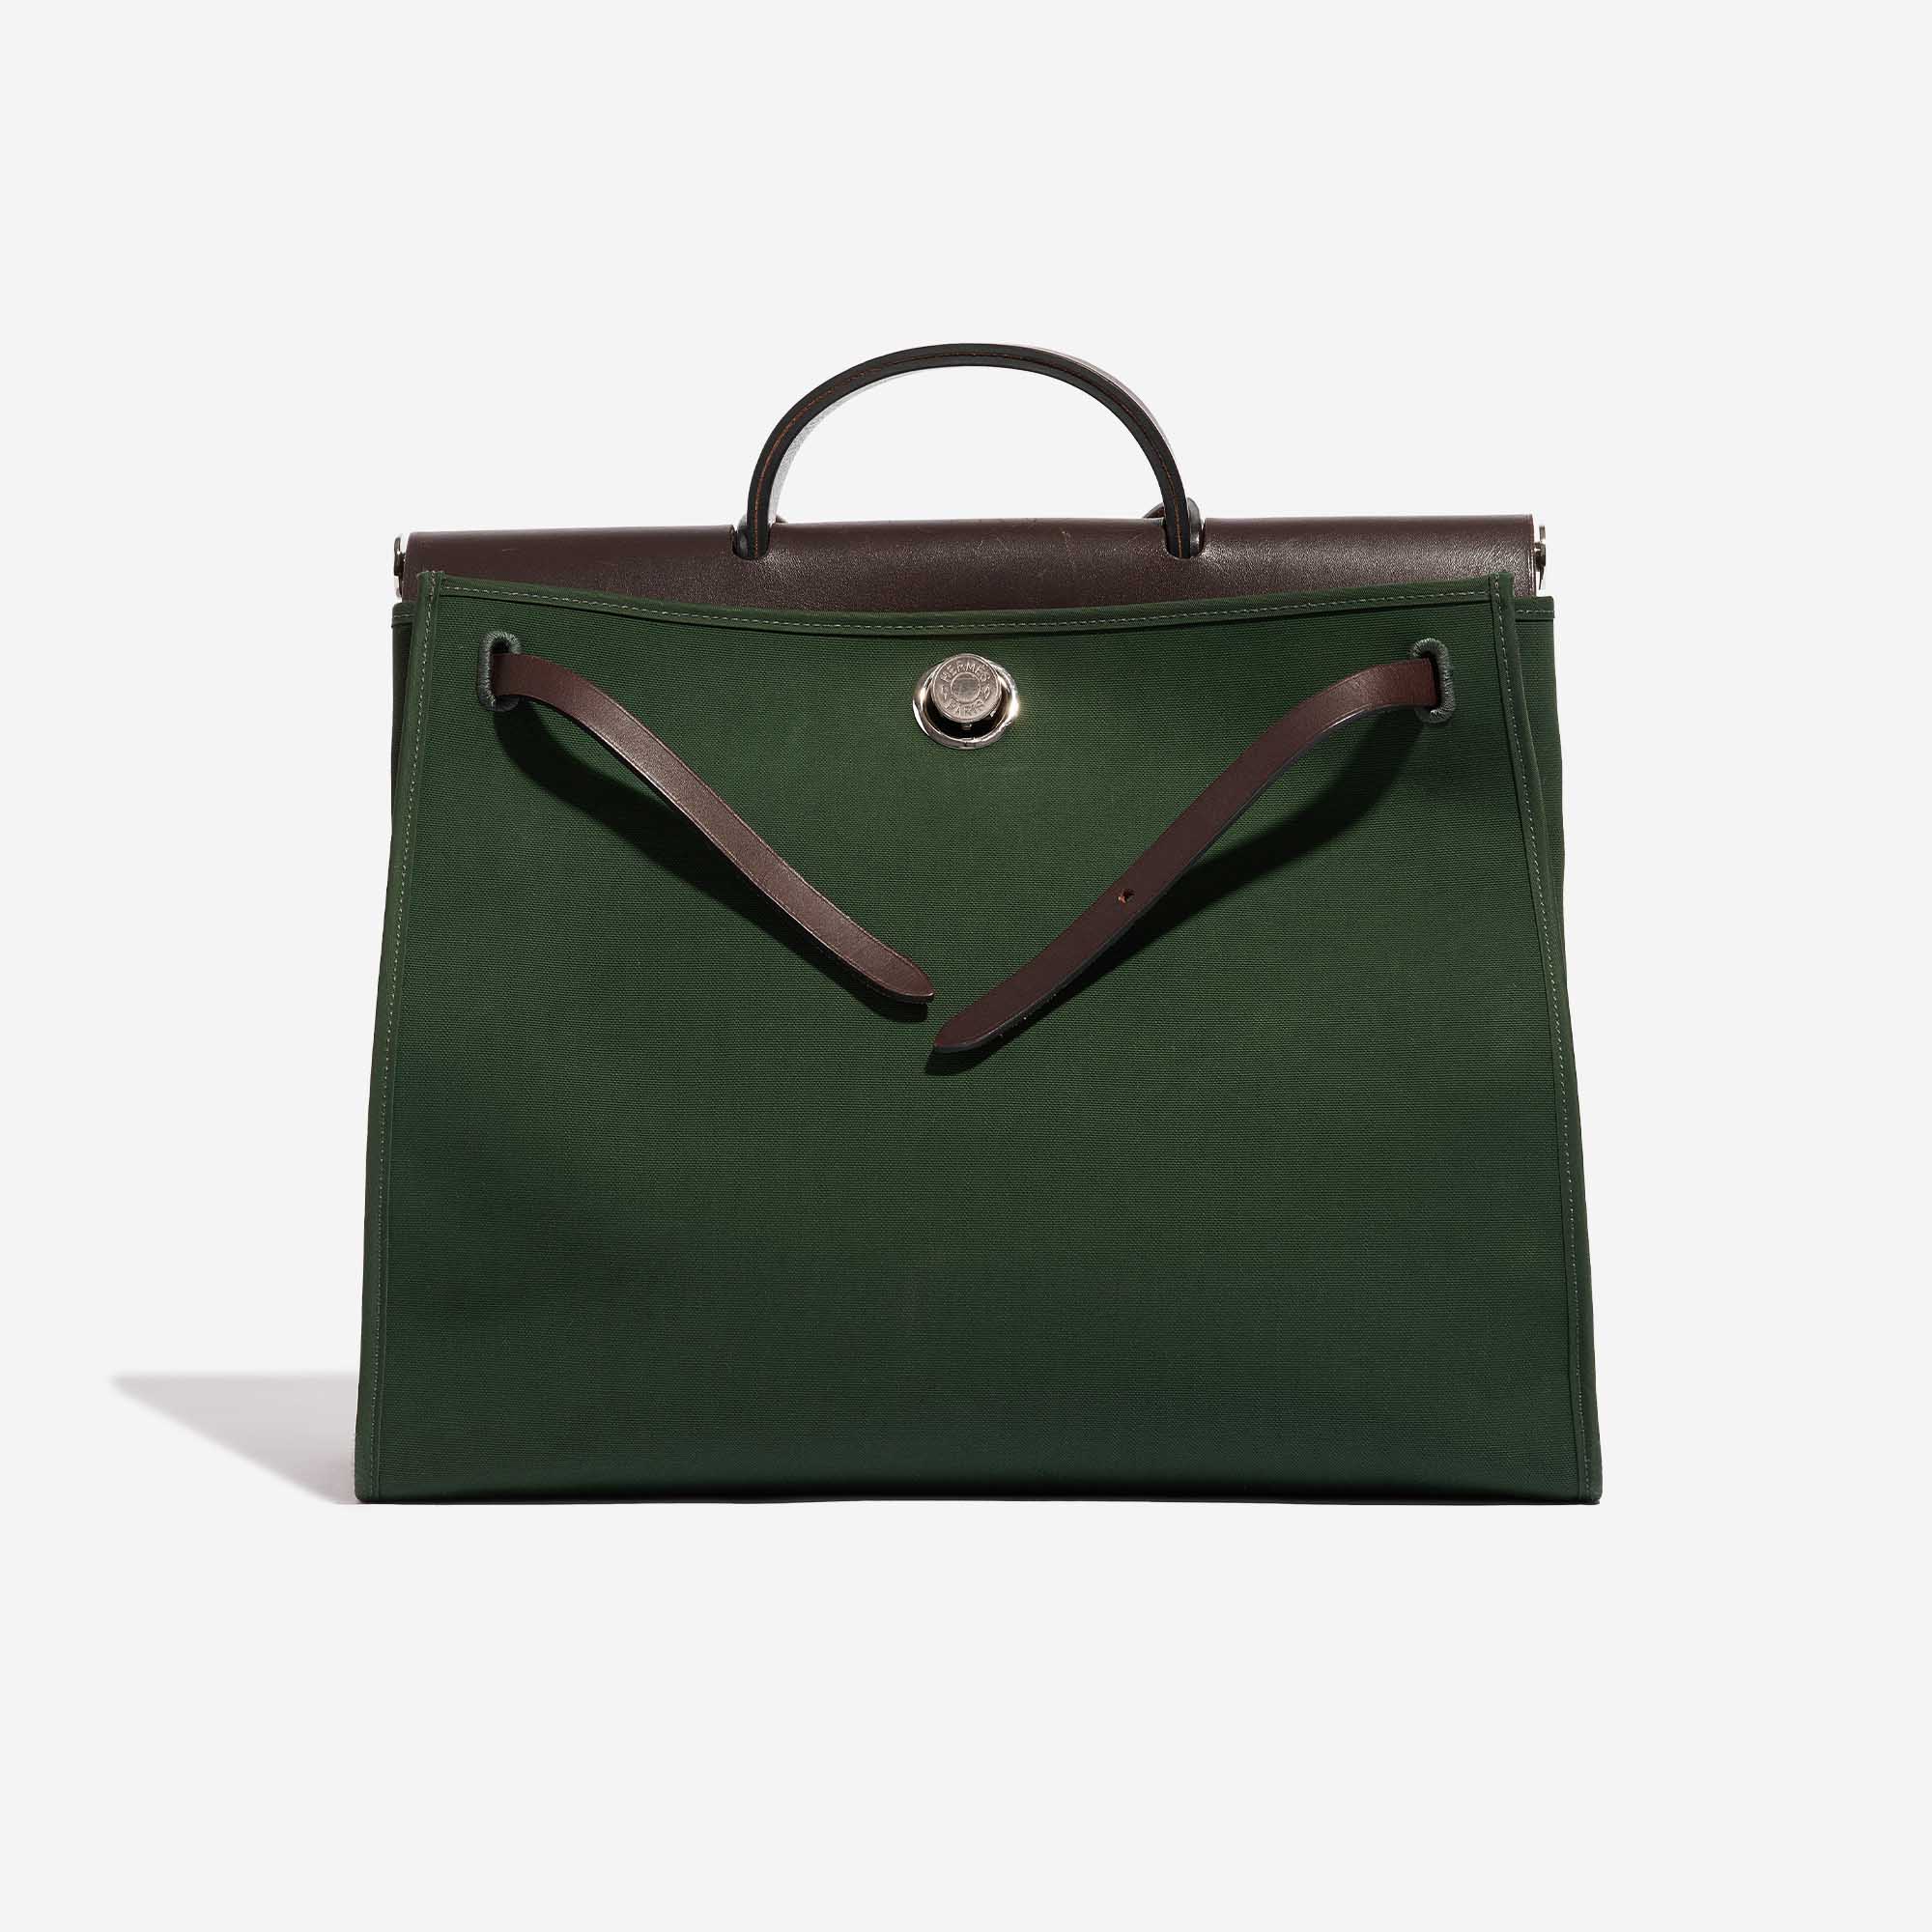 Pre-owned Hermès bag Herbag 39 Toile / Vache Hunter Vert Anglais / Ebene Brown, Green Front Open | Sell your designer bag on Saclab.com